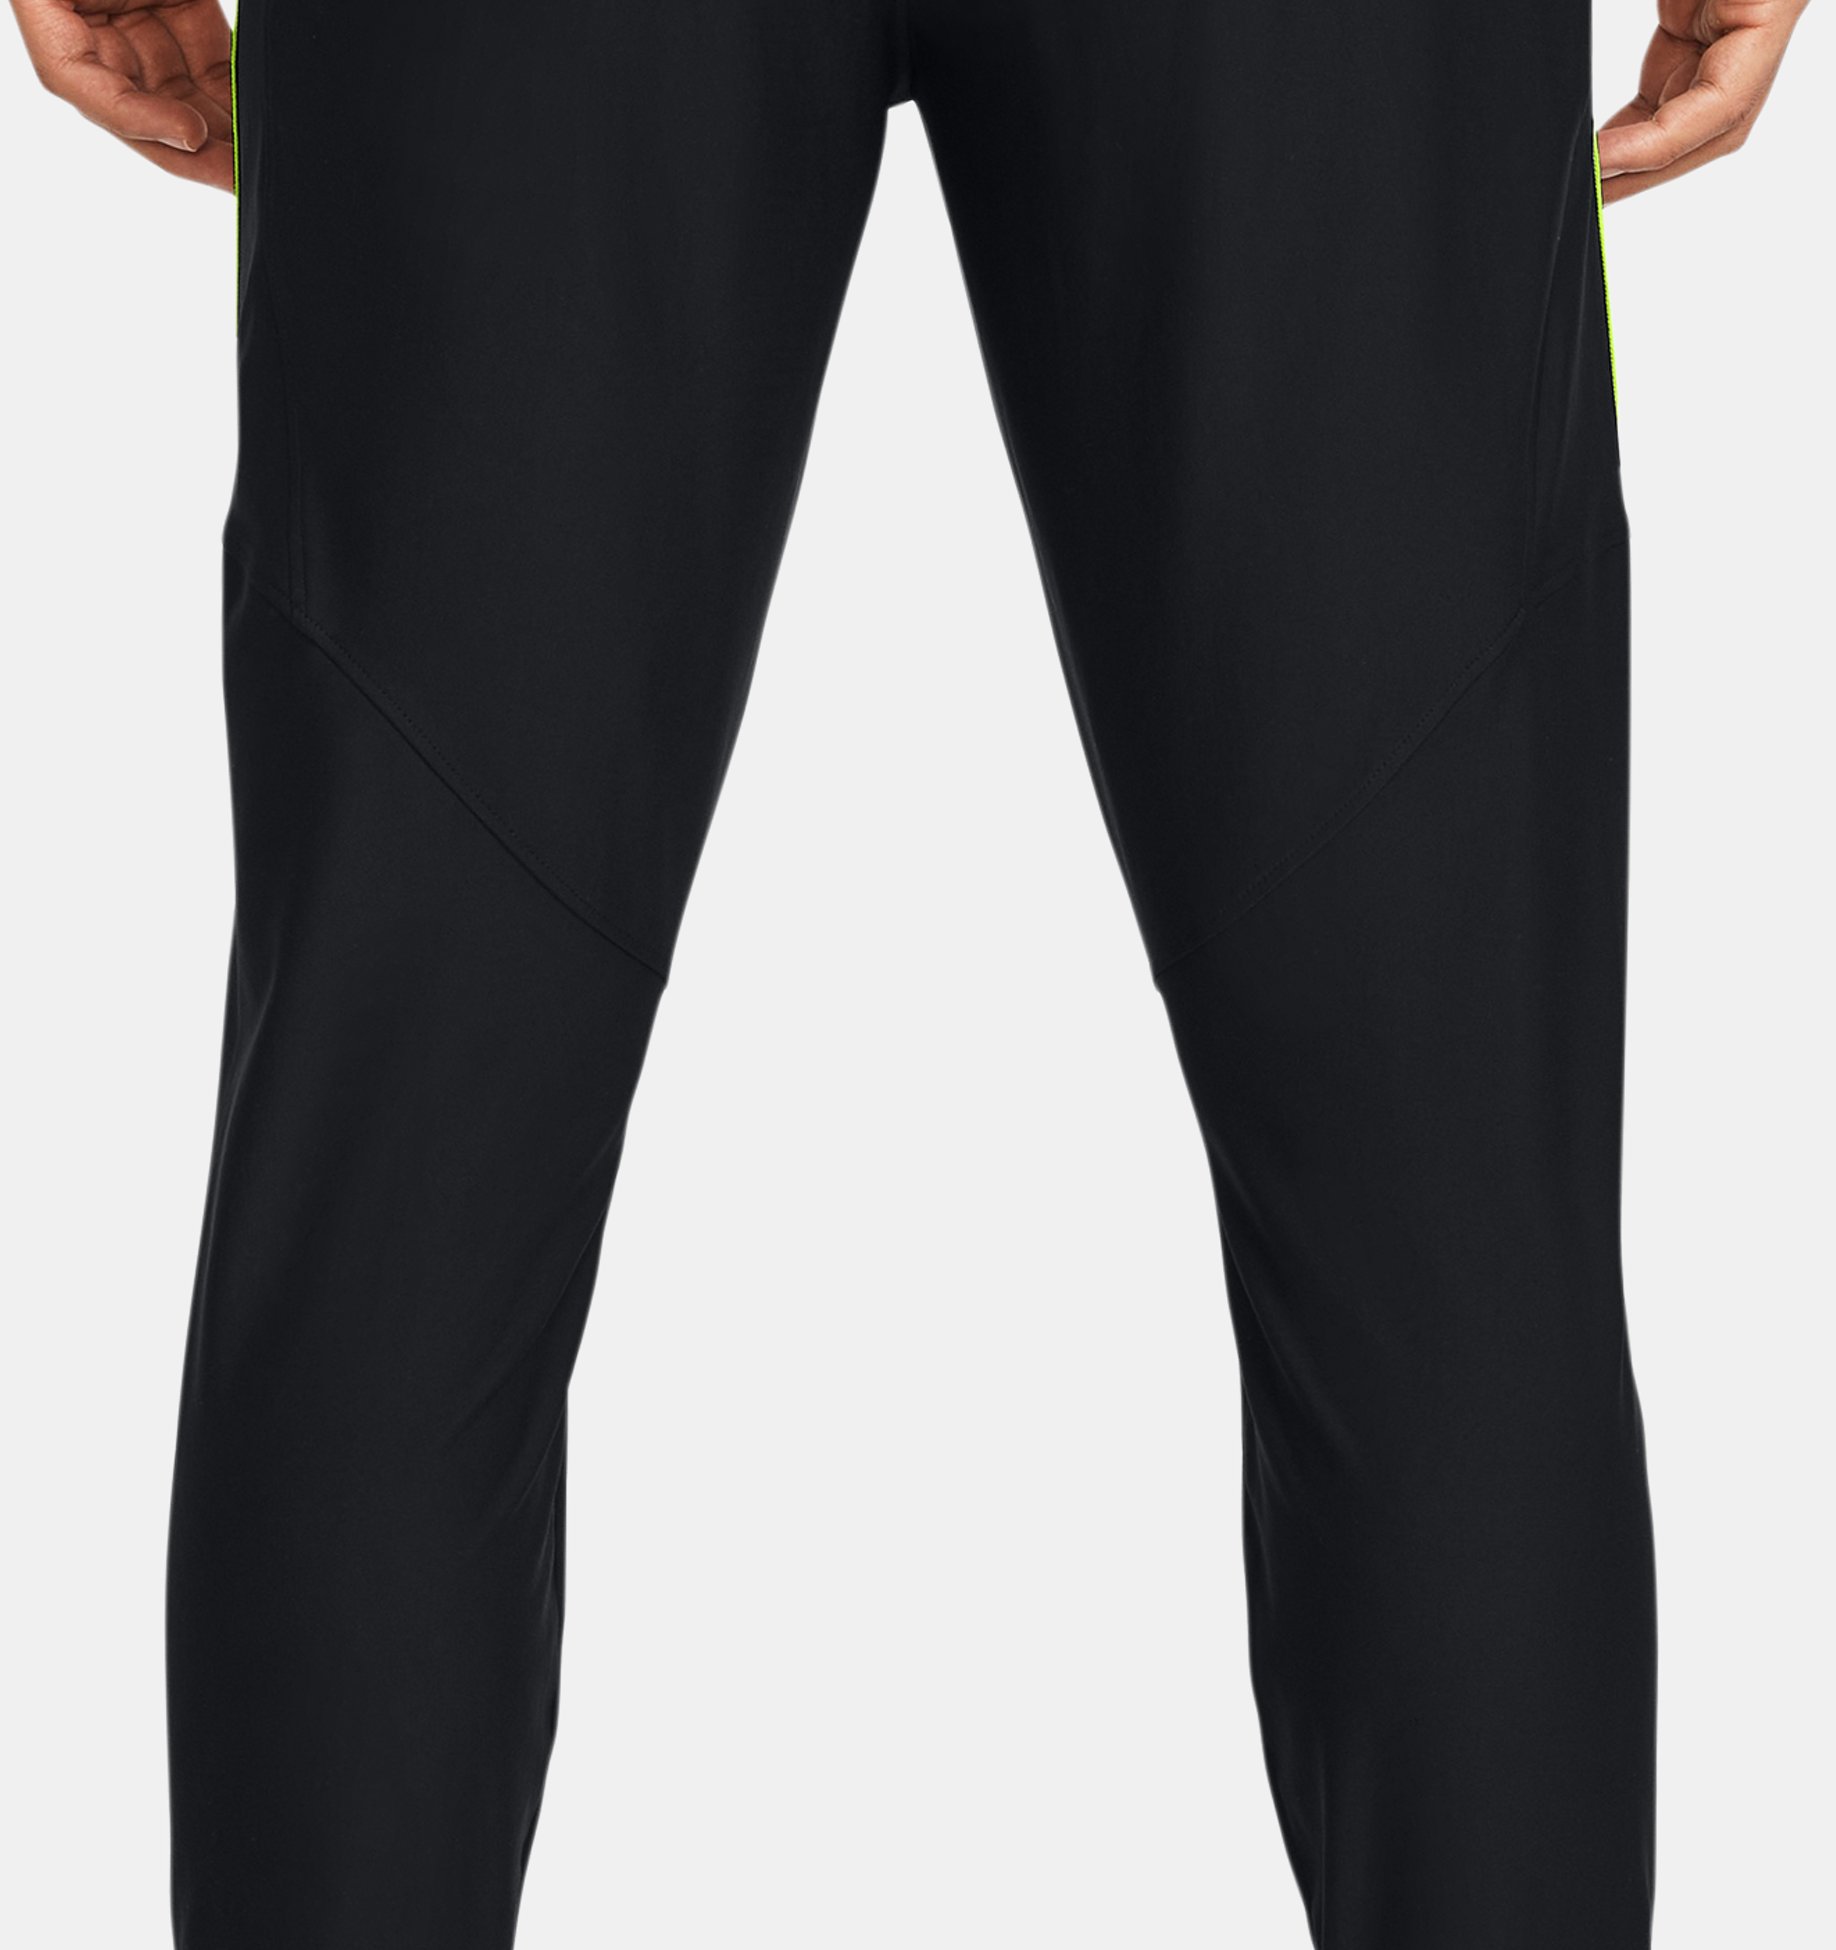 Under Armour Challenger II Training Pant Anthracite Grey